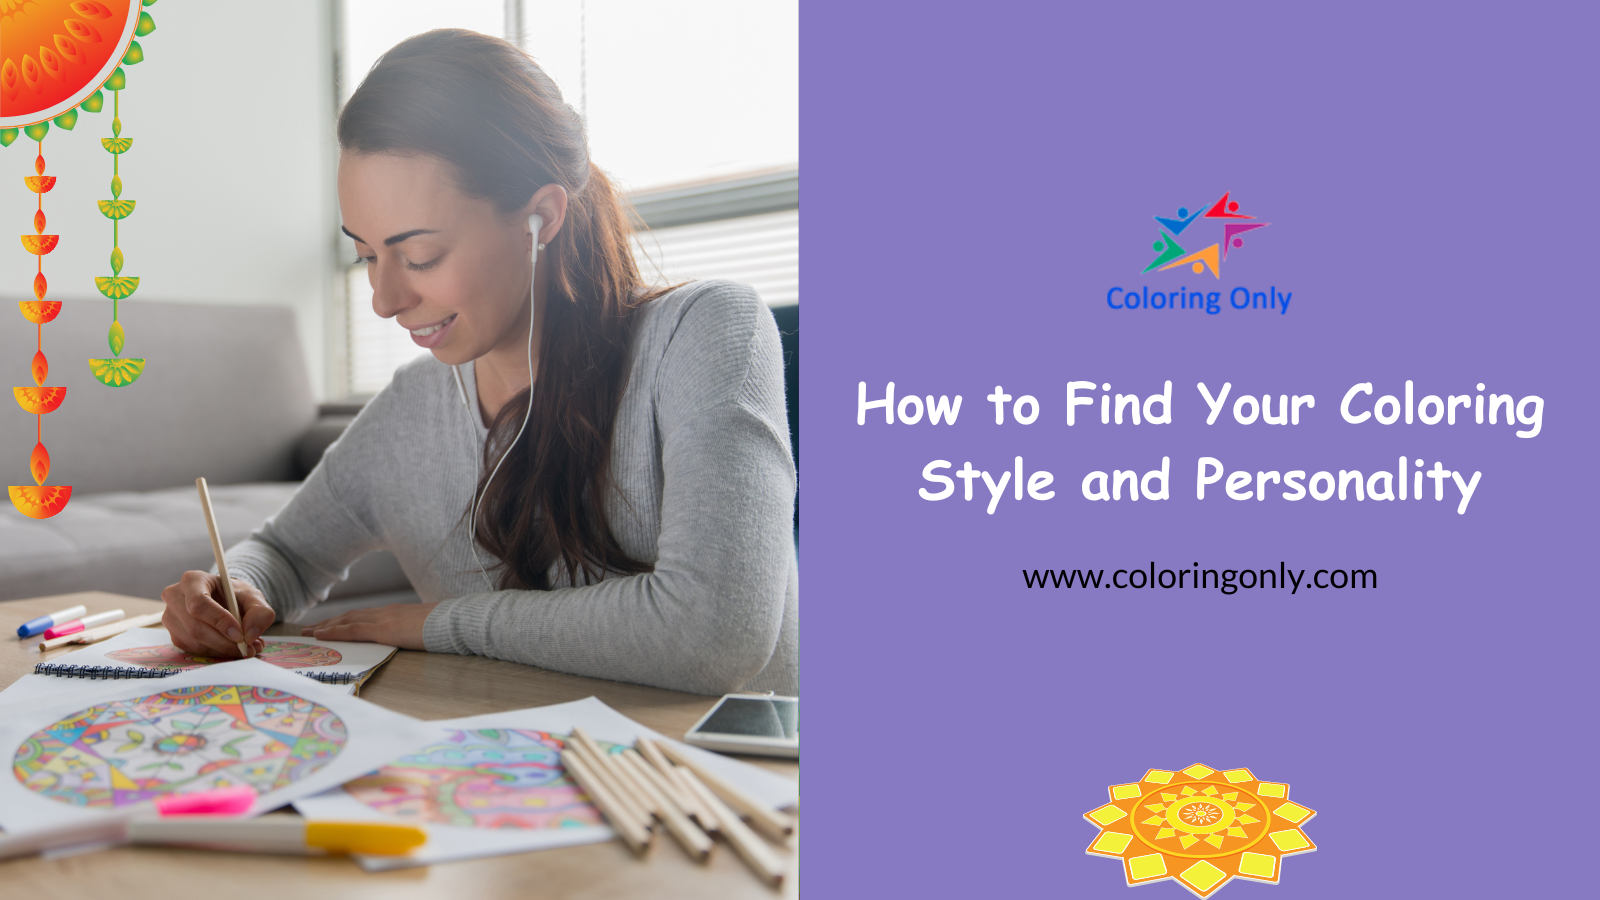 How to Find Your Coloring Style and Personality